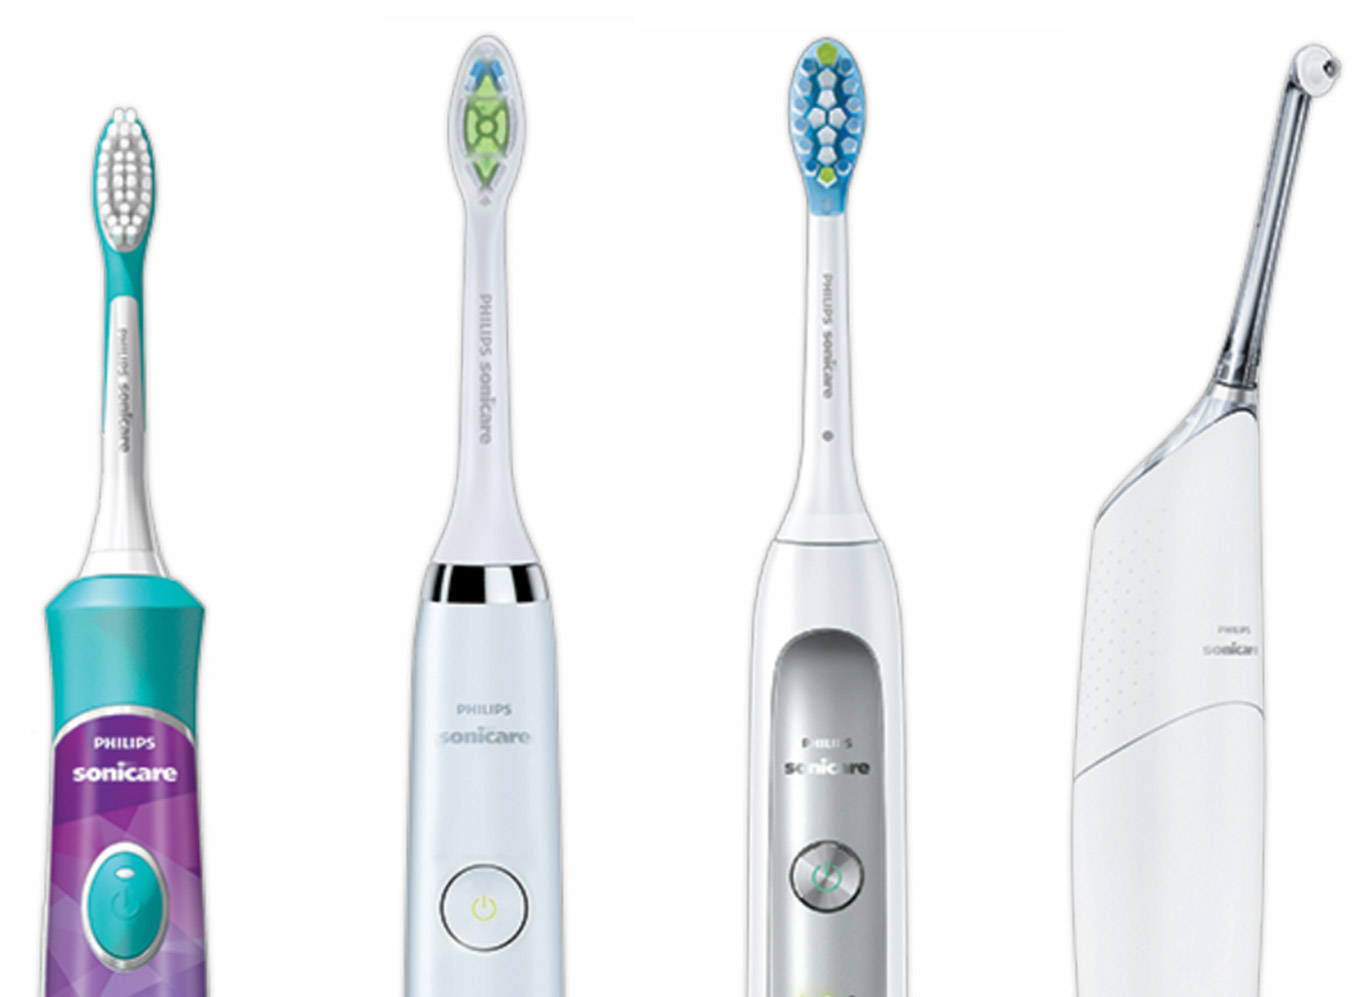 Philips brand toothbrushes